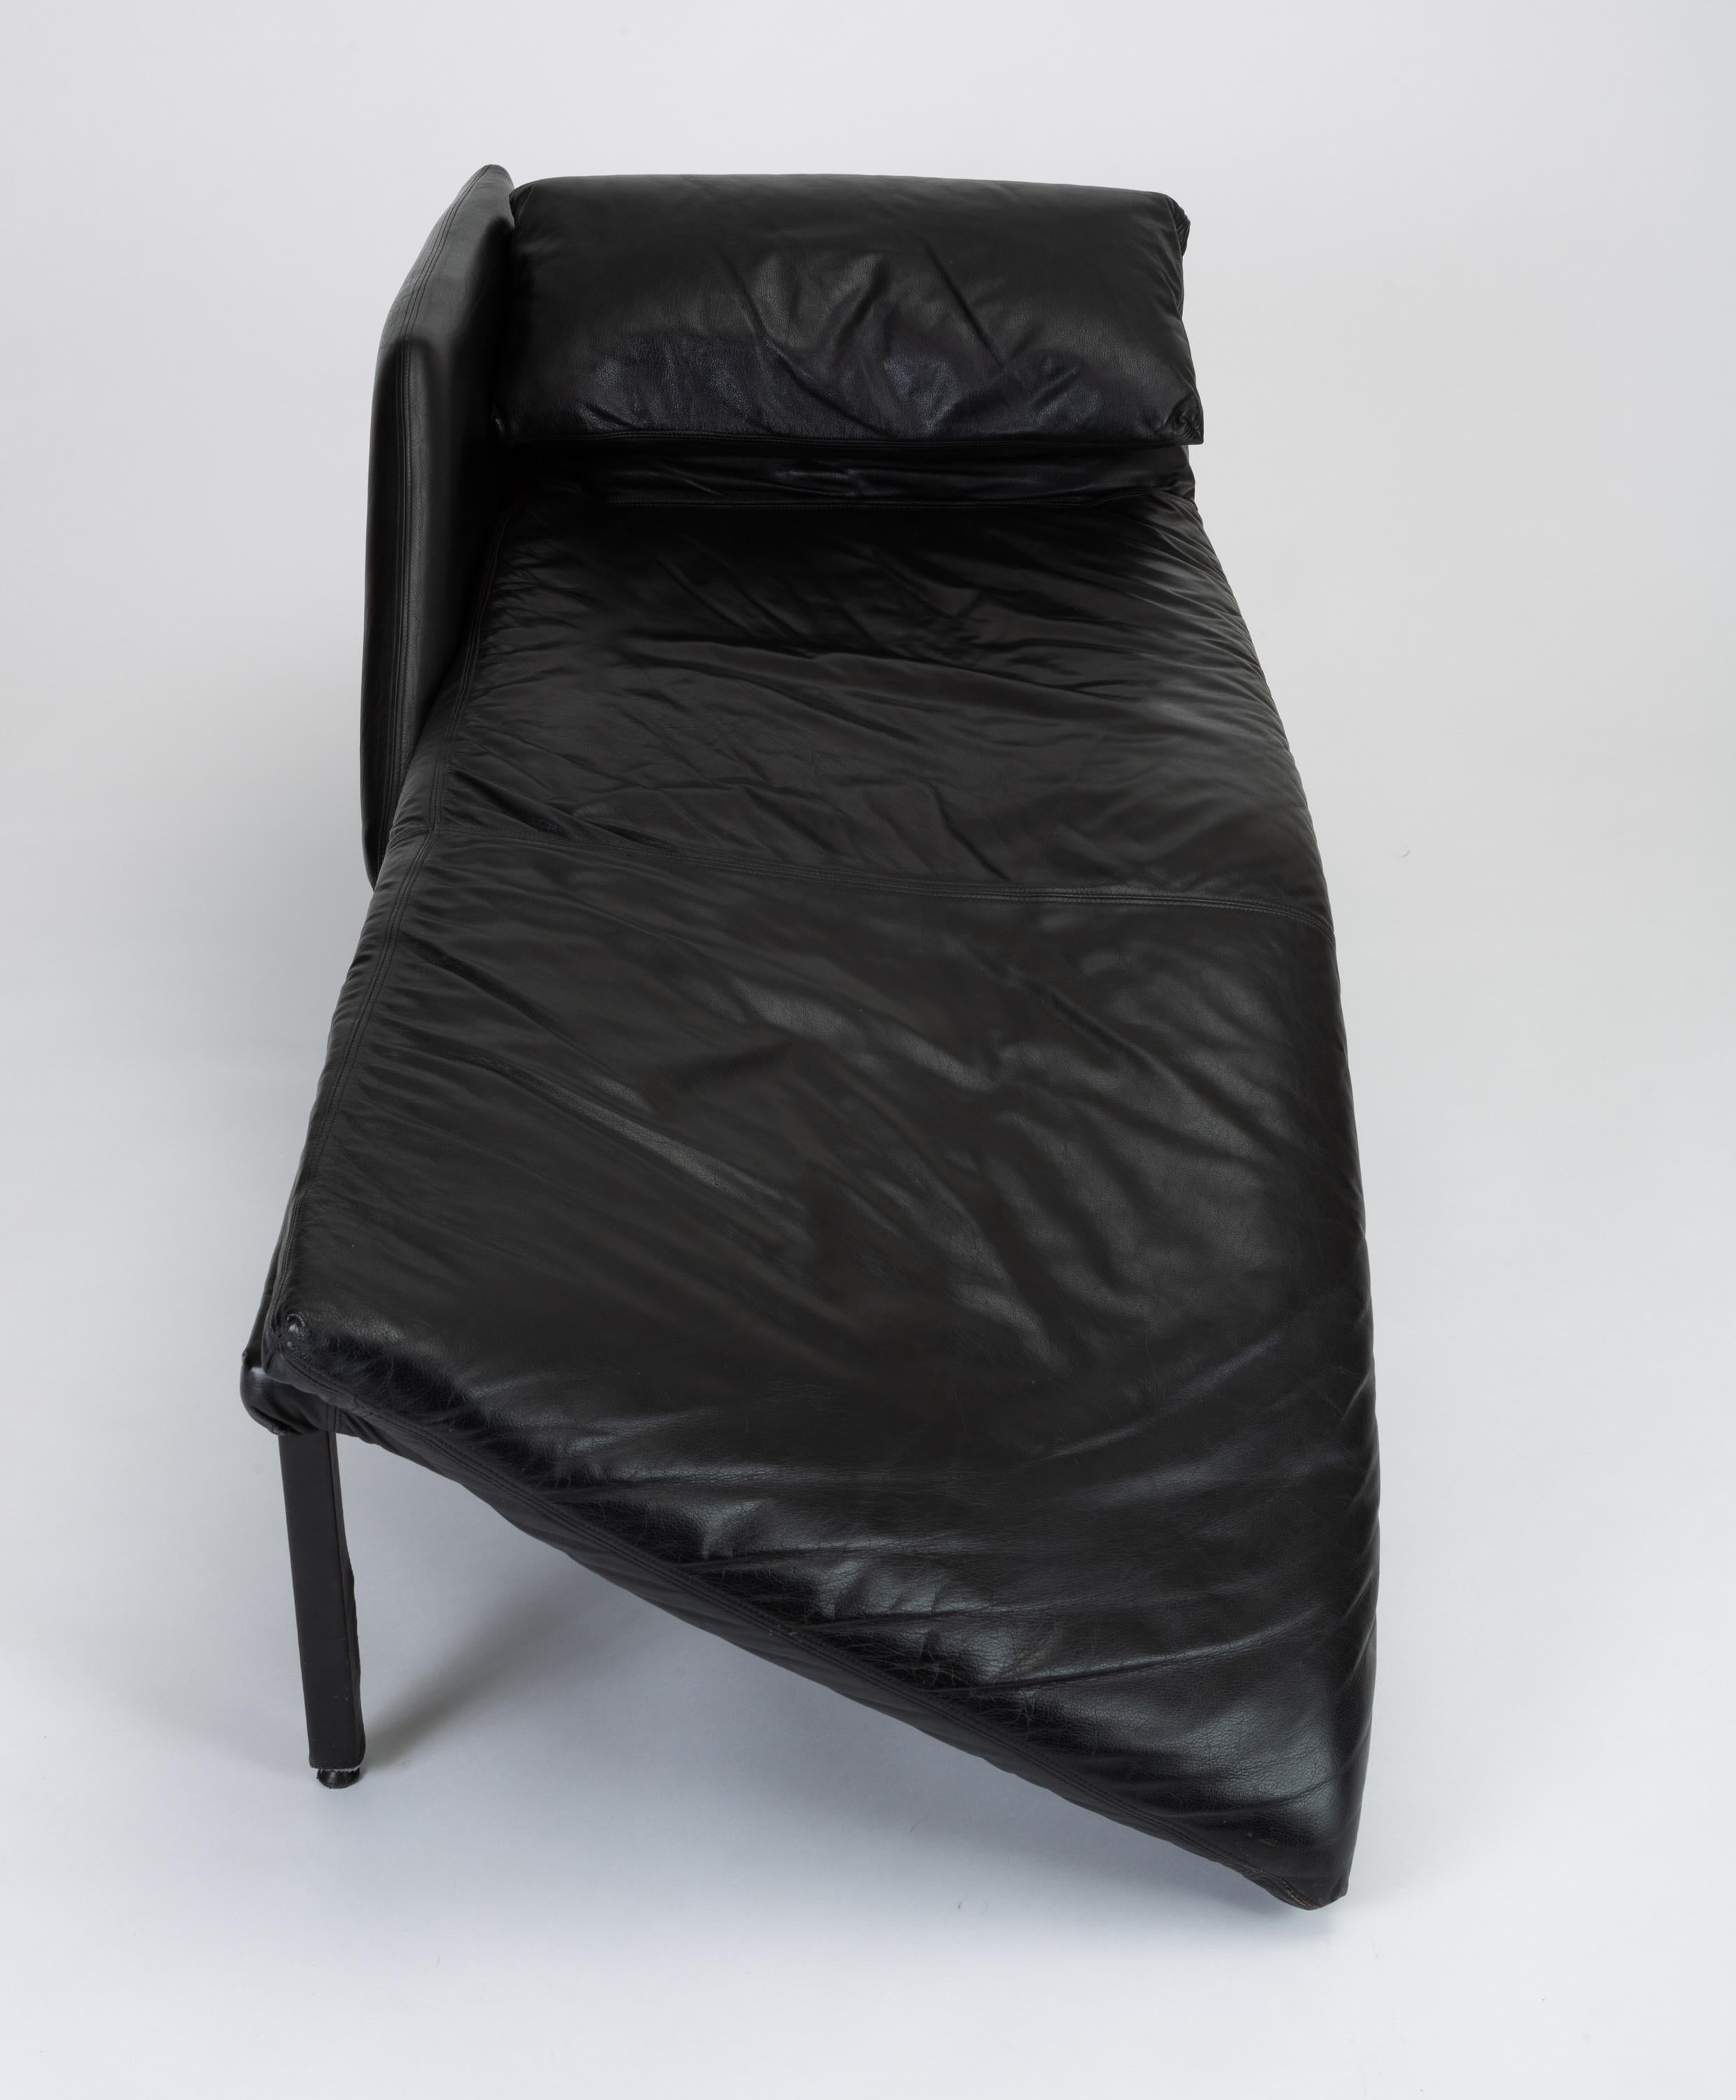 1980s Leather Chaise Lounge by Preview 1